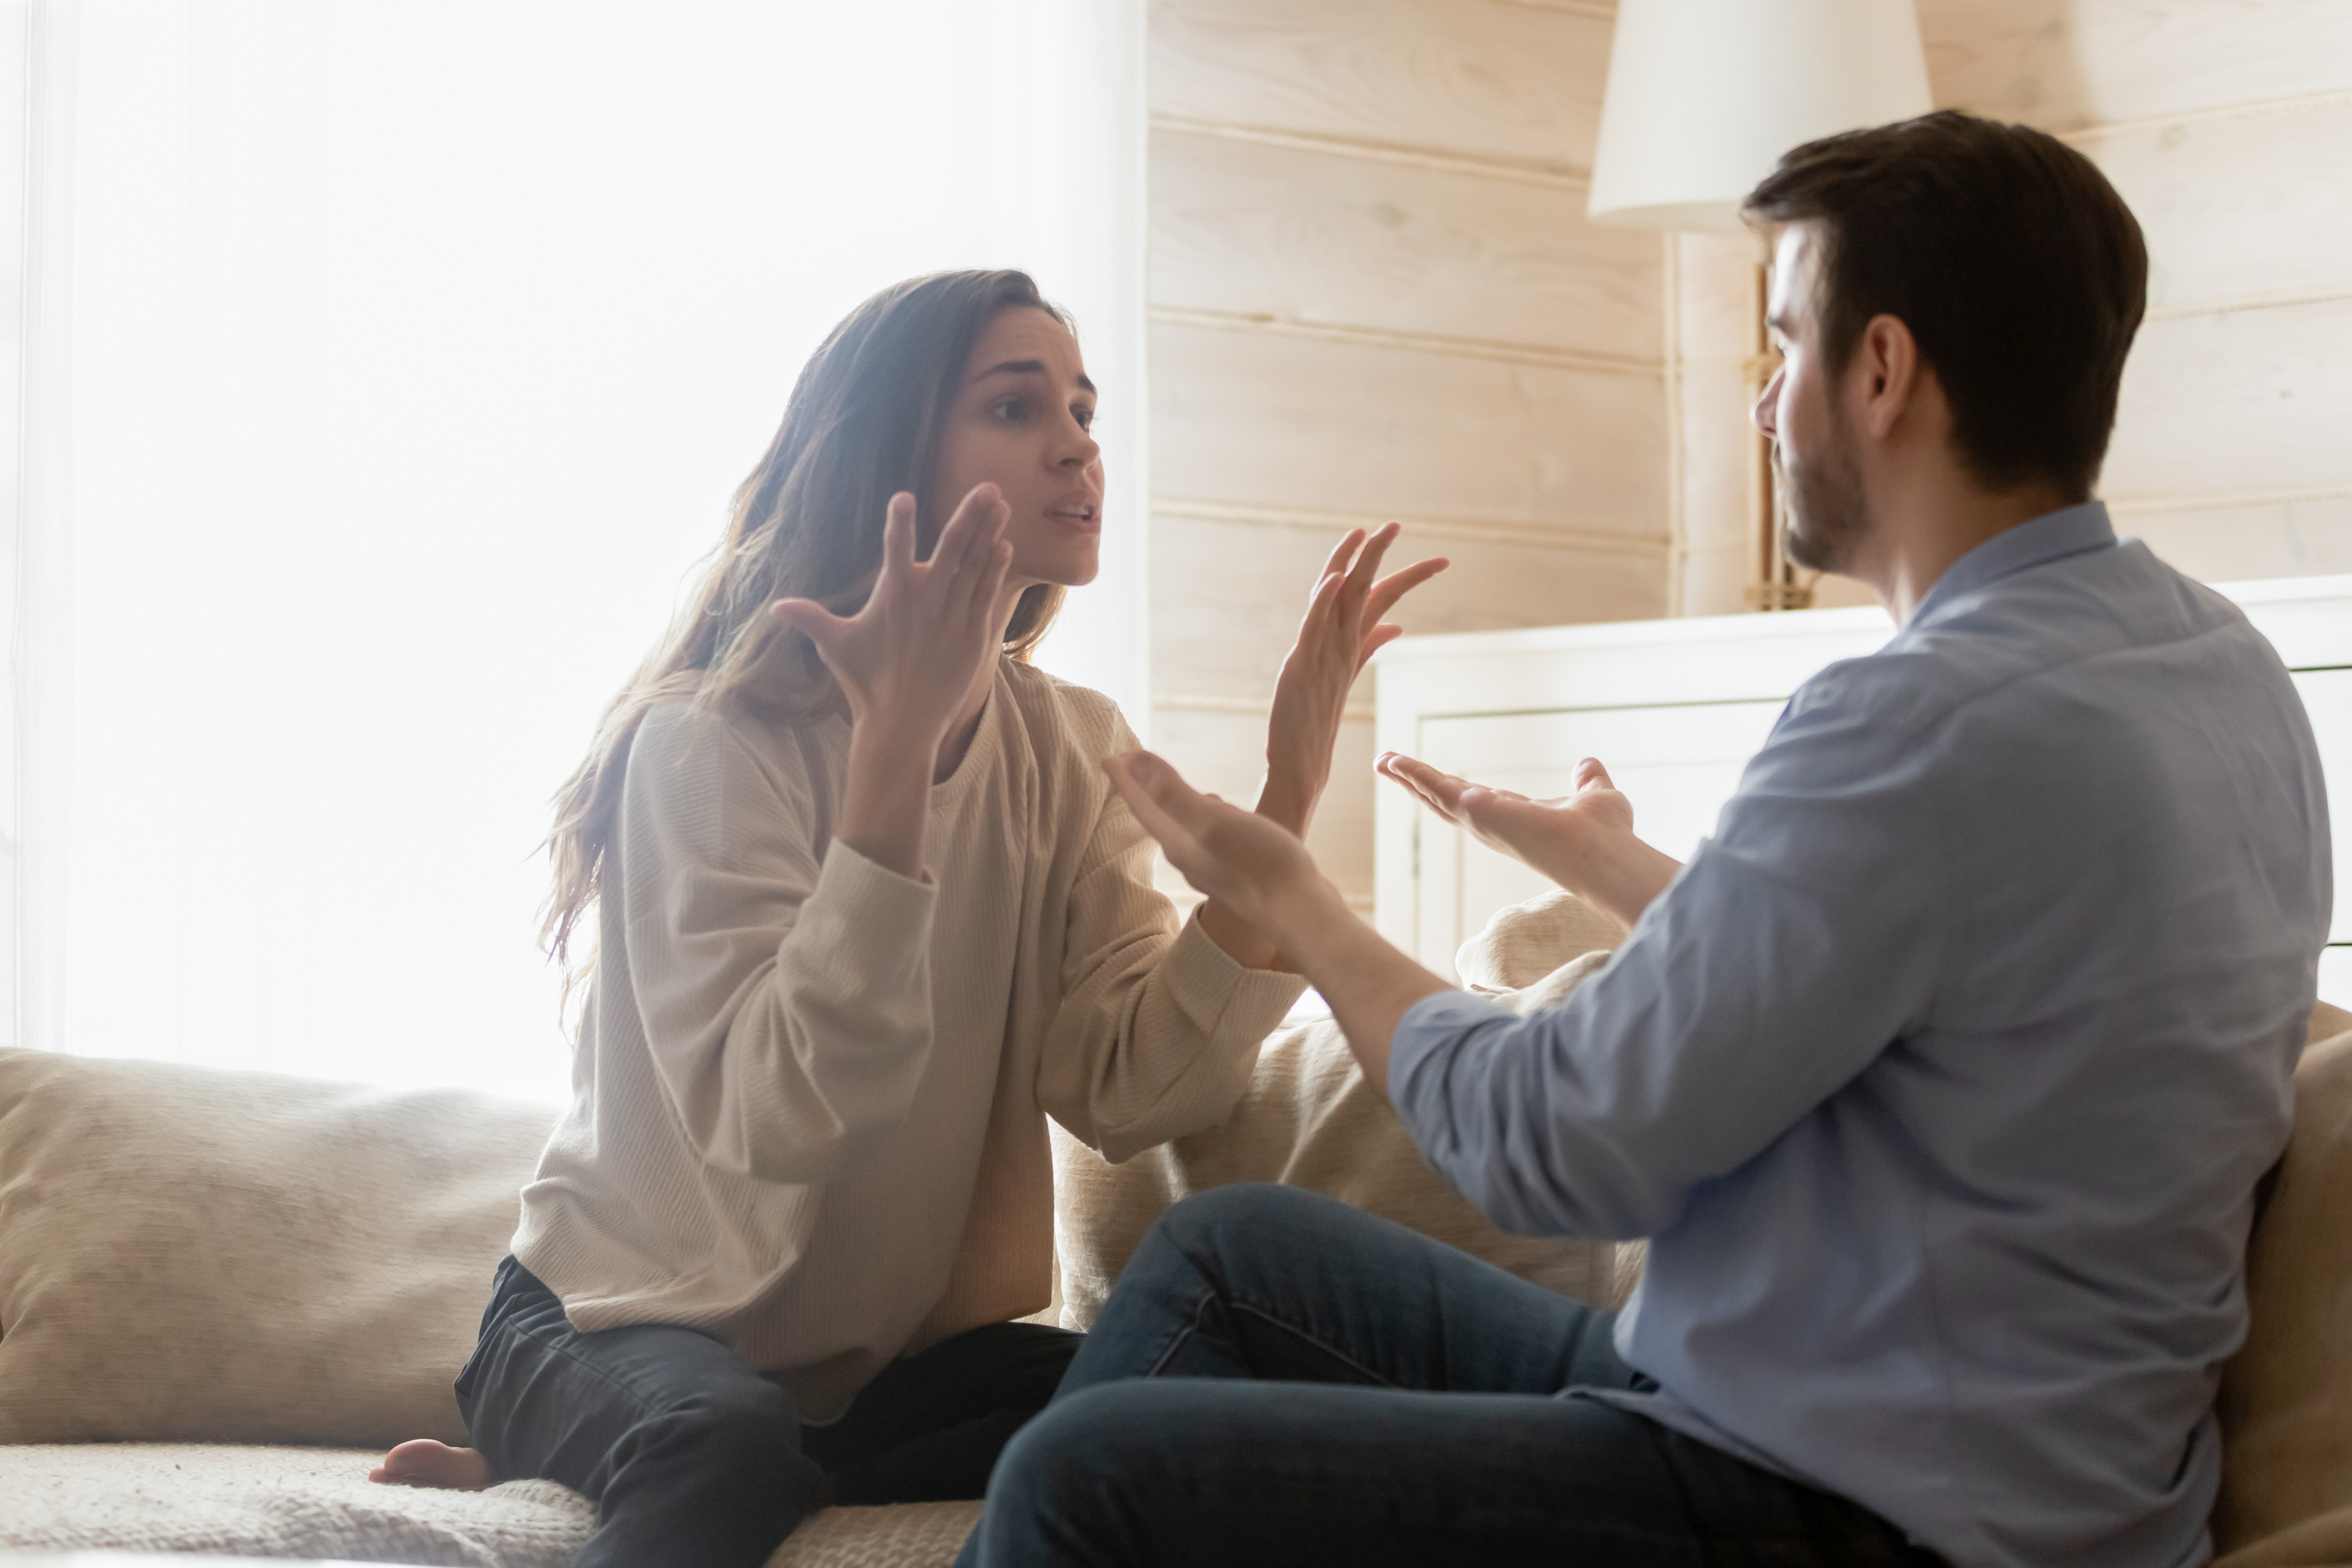 A couple arguing in the living room | Source: Shutterstock